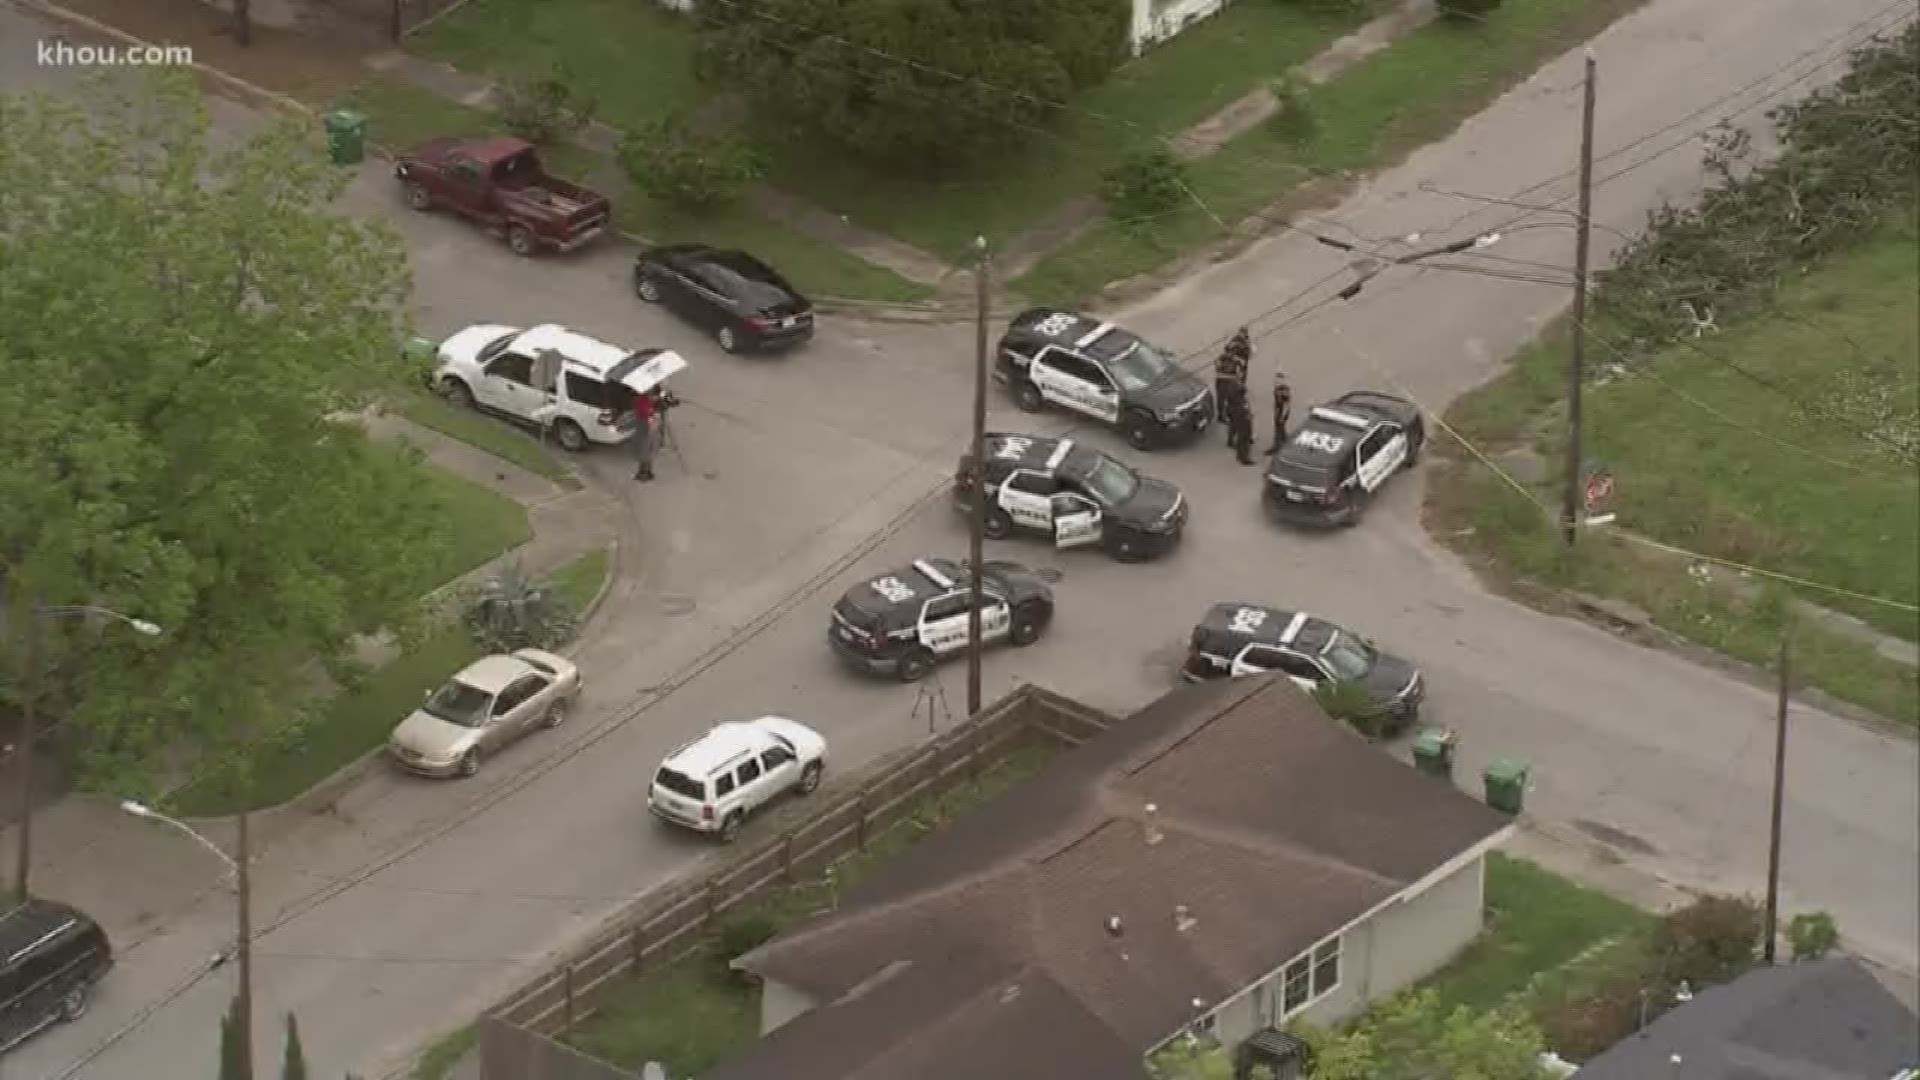 A body was found in a ditch in northeast Houston Wednesday morning, according to Houston police